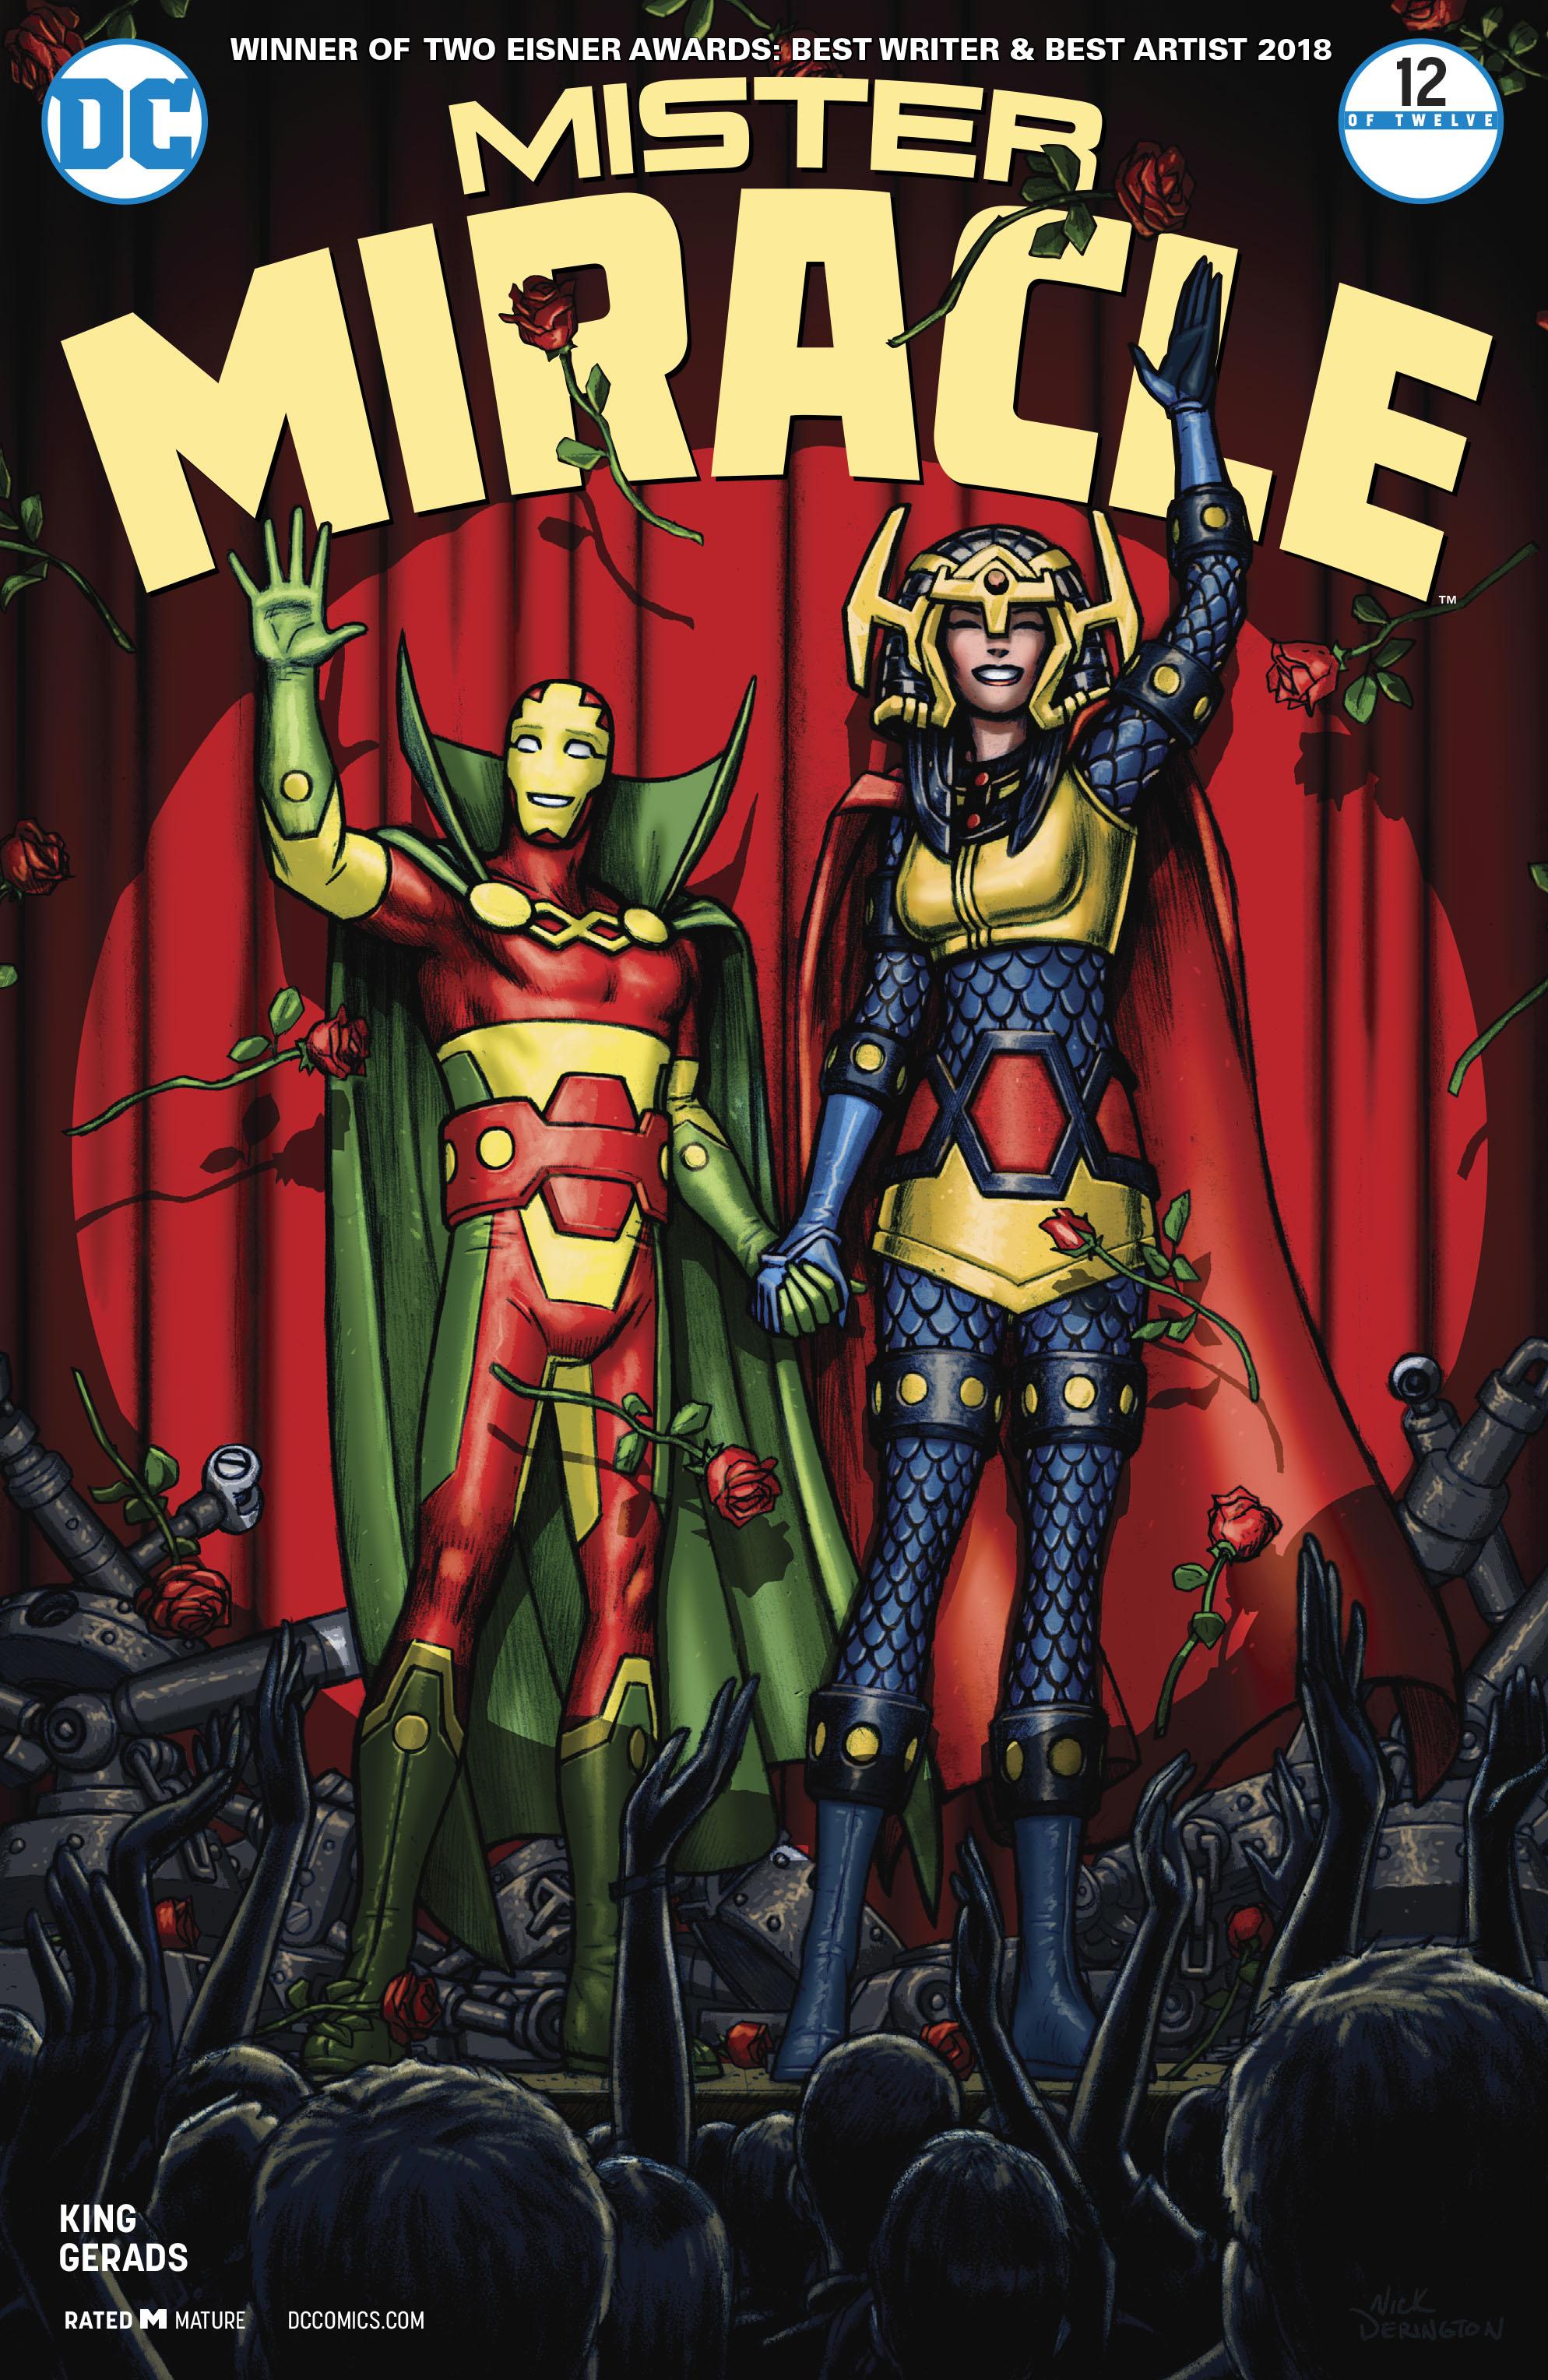 Mister Miracle Vol. 4 #12